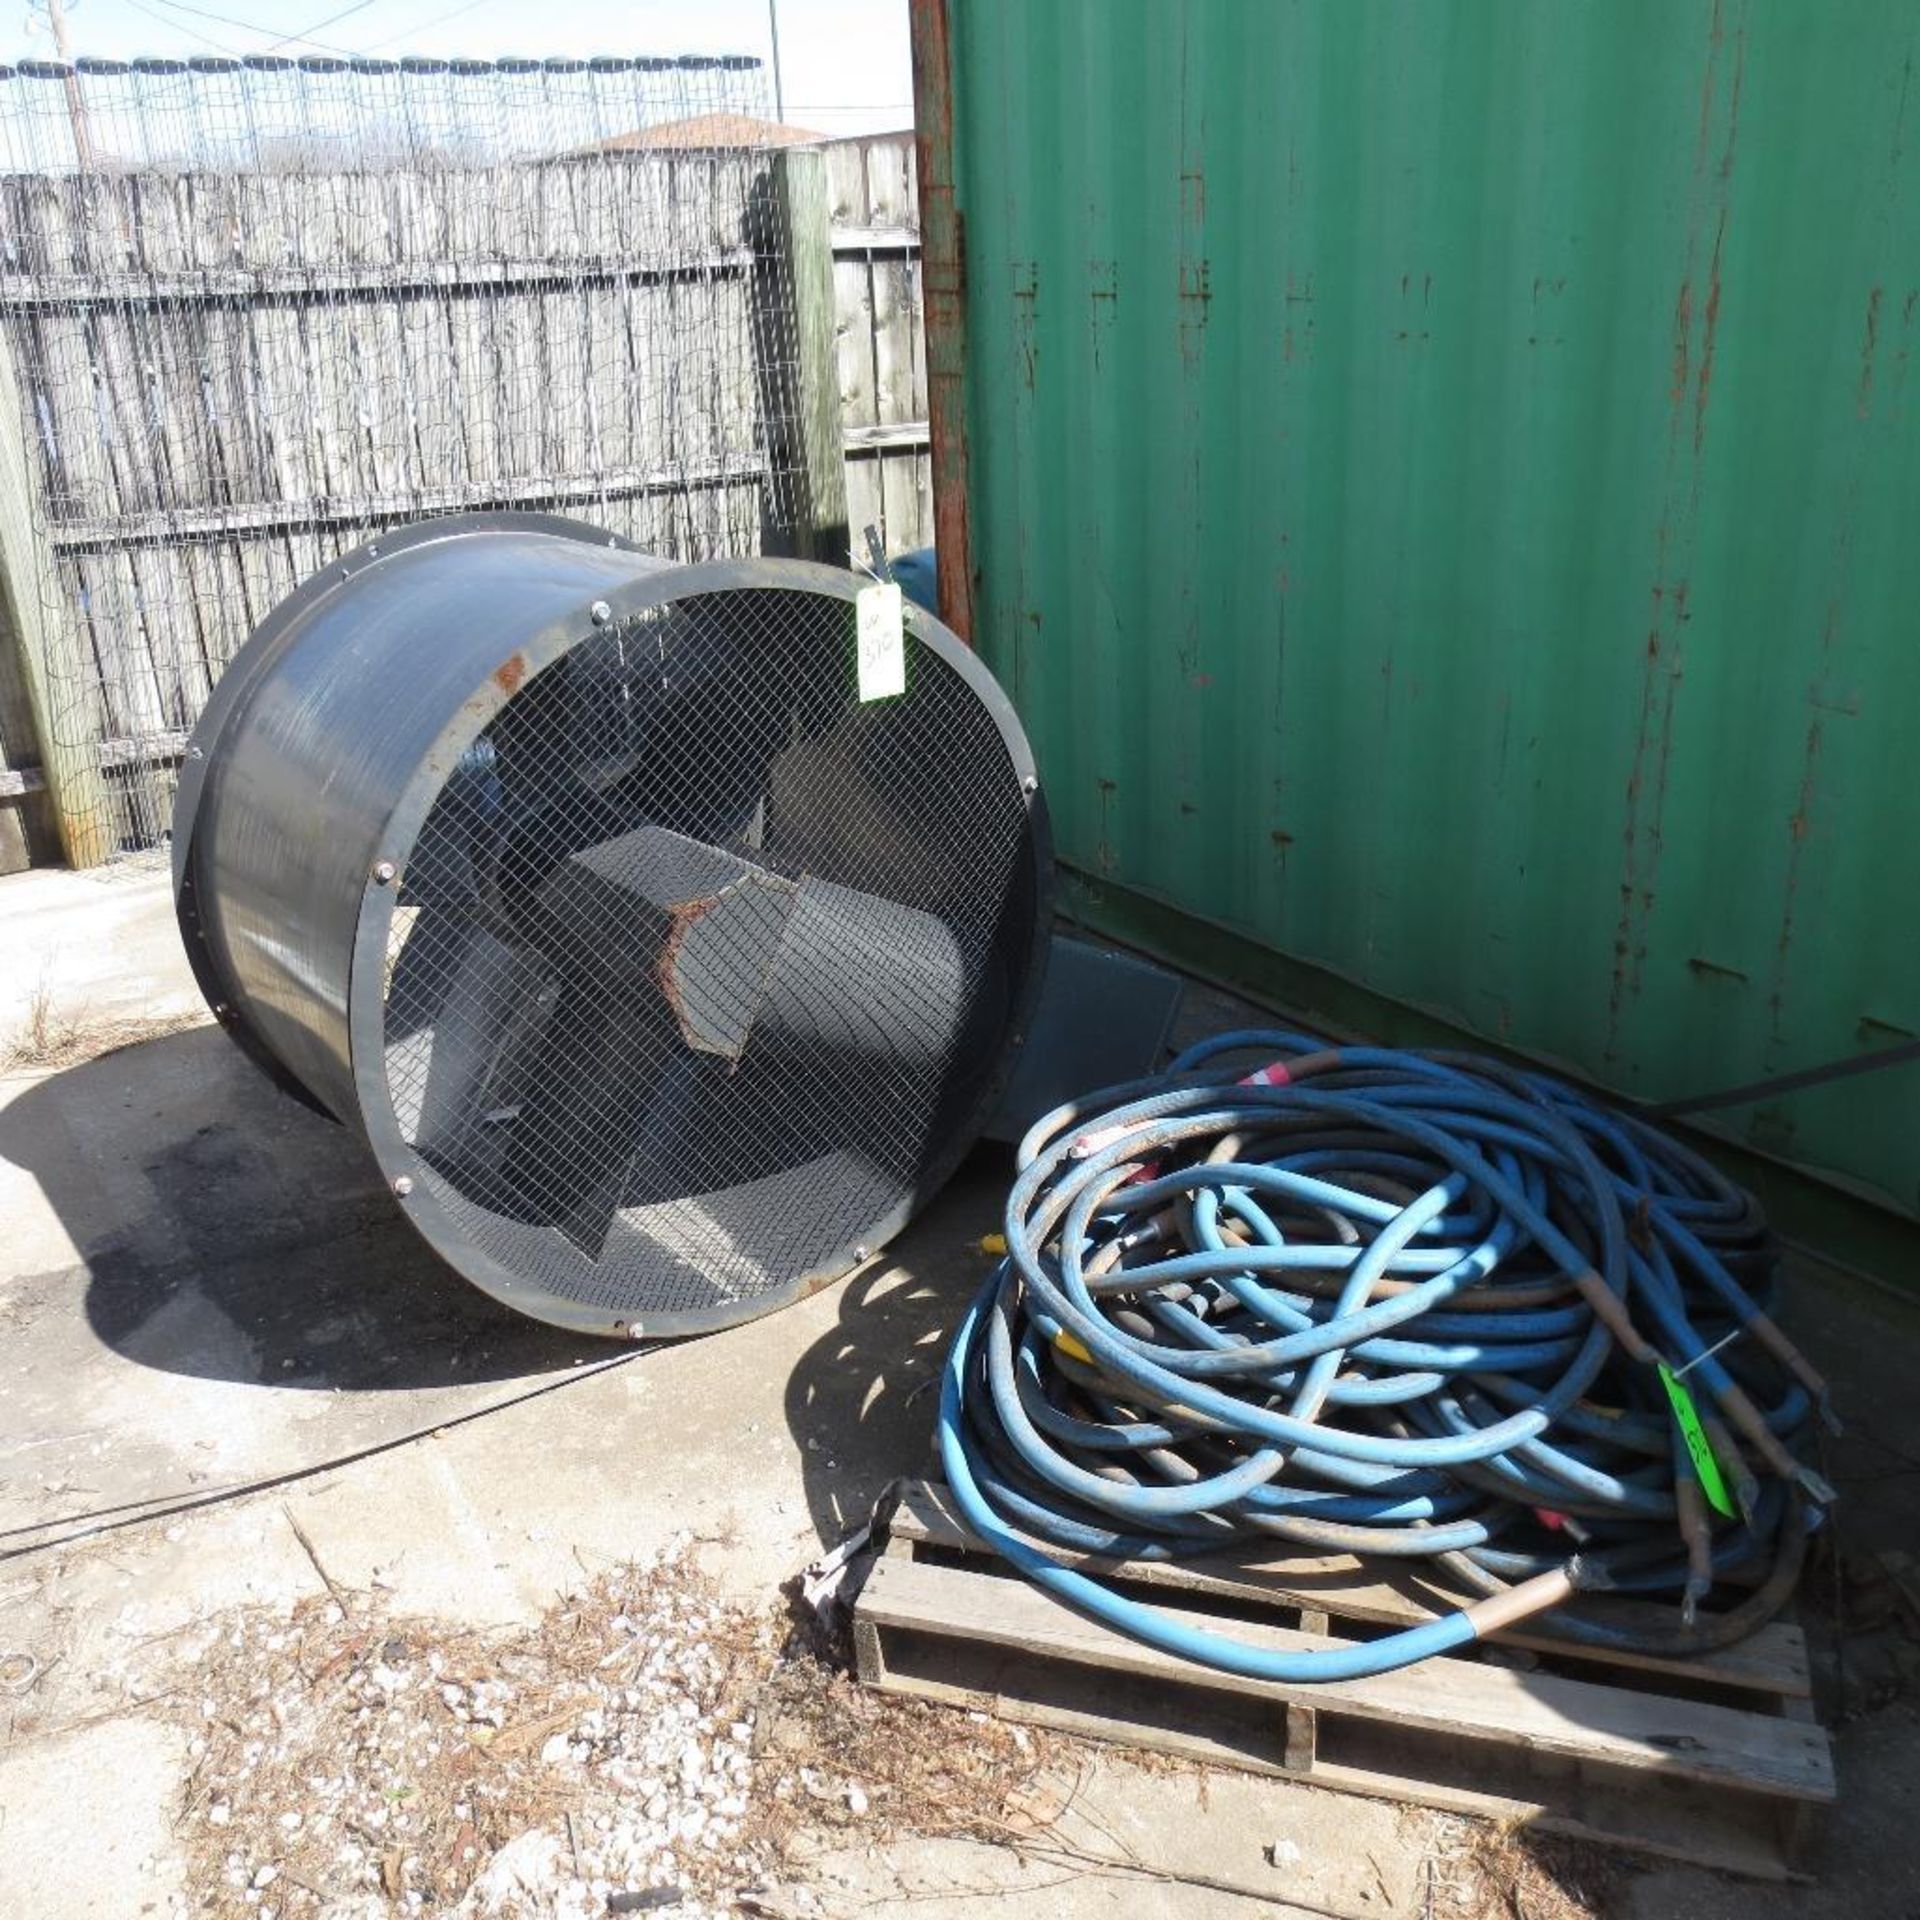 Fan, Electrical Box and Feeder; located at 8129 South Industrial Drive Cedar Hill, MO 63016 - Image 2 of 2